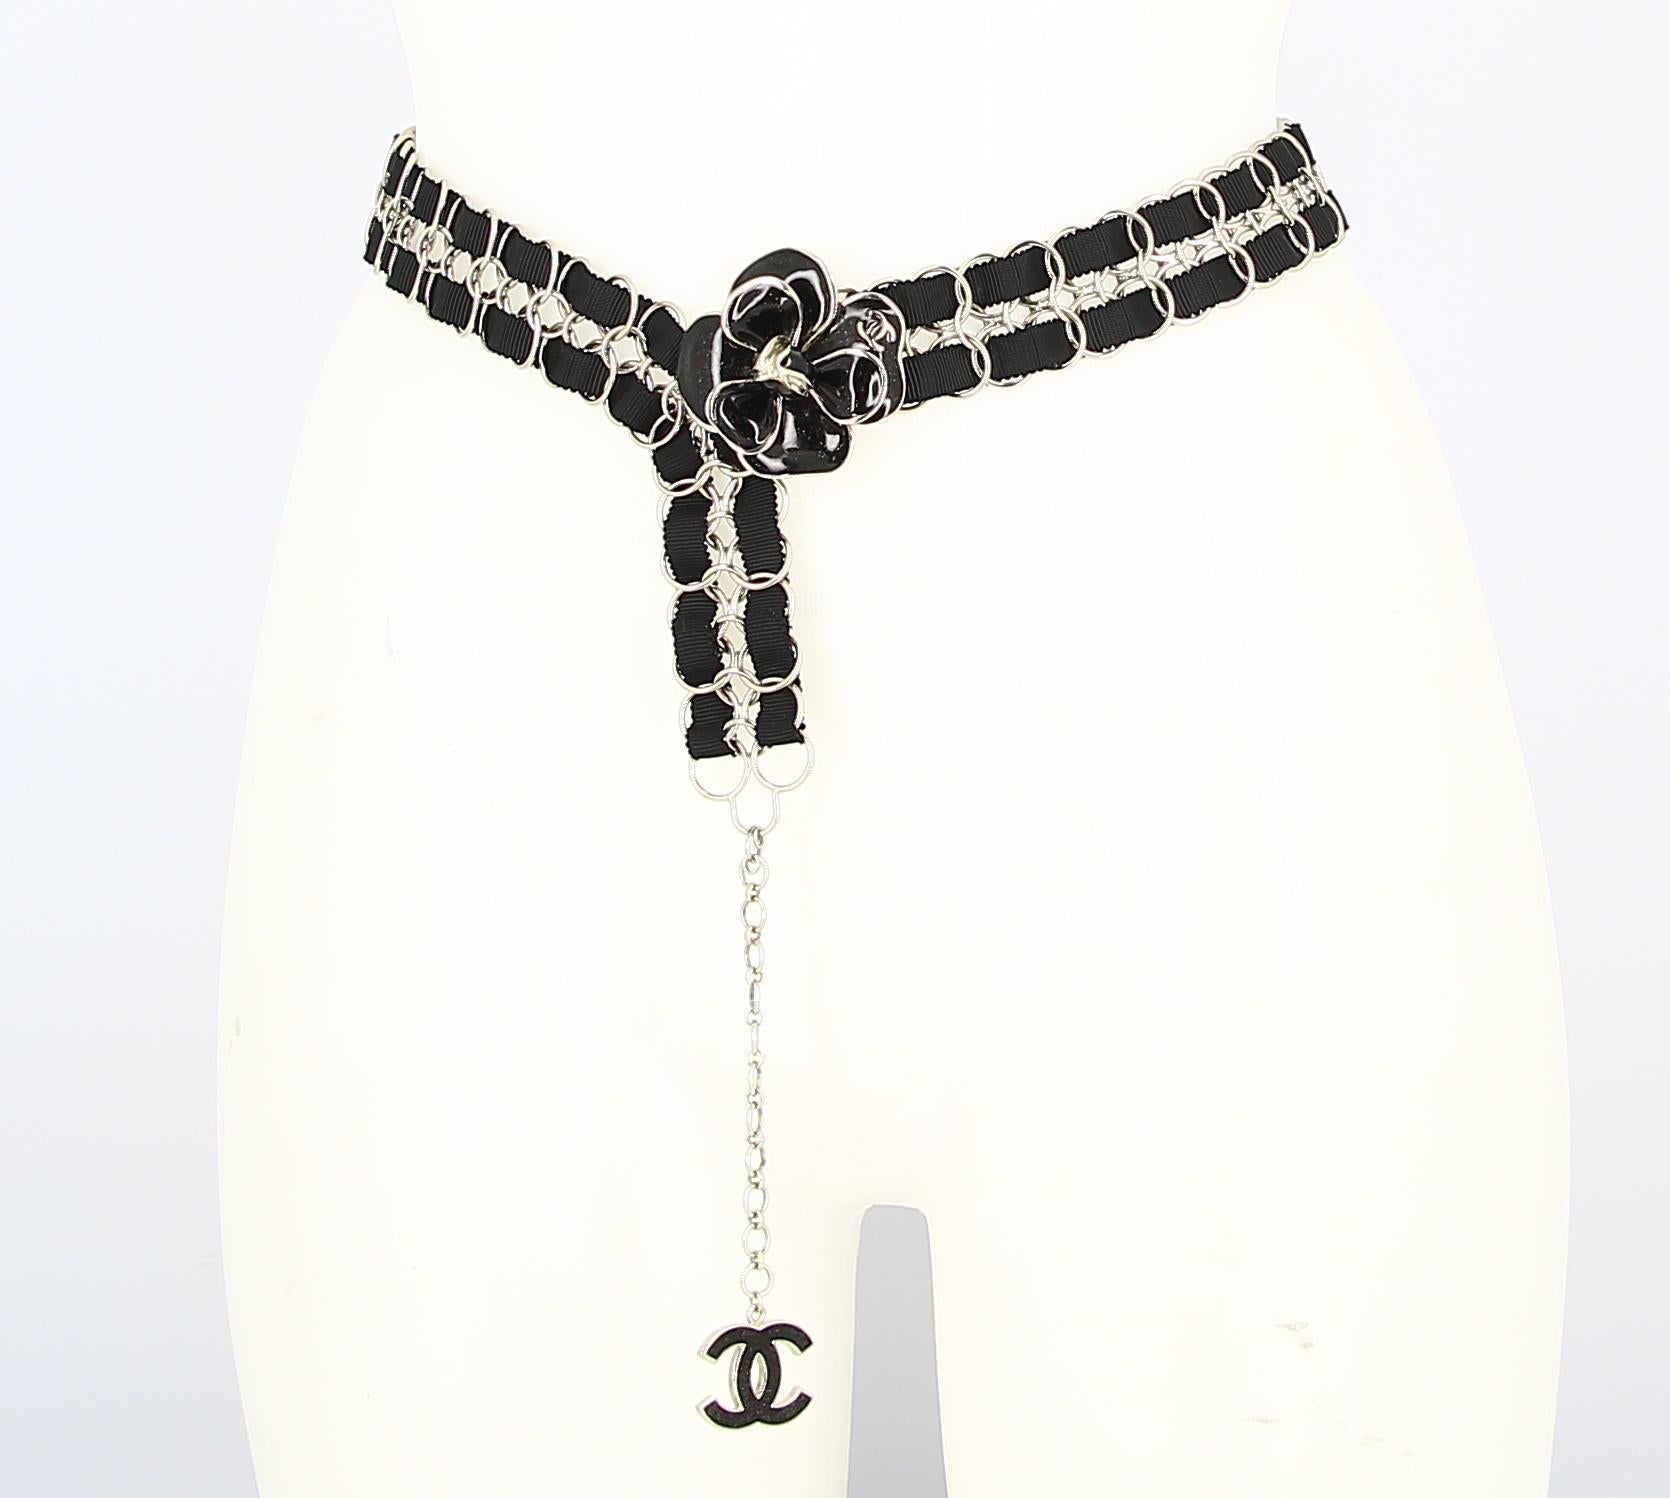 Chanel Black Fabric Belt with Silver Ring
- Good condition, shows slight traces of wear and tear over time
- Black Chanel belt, flowers with double C logo in grey silver, grey silver rings, double C at the end of the belt

Height 88 cm / 34